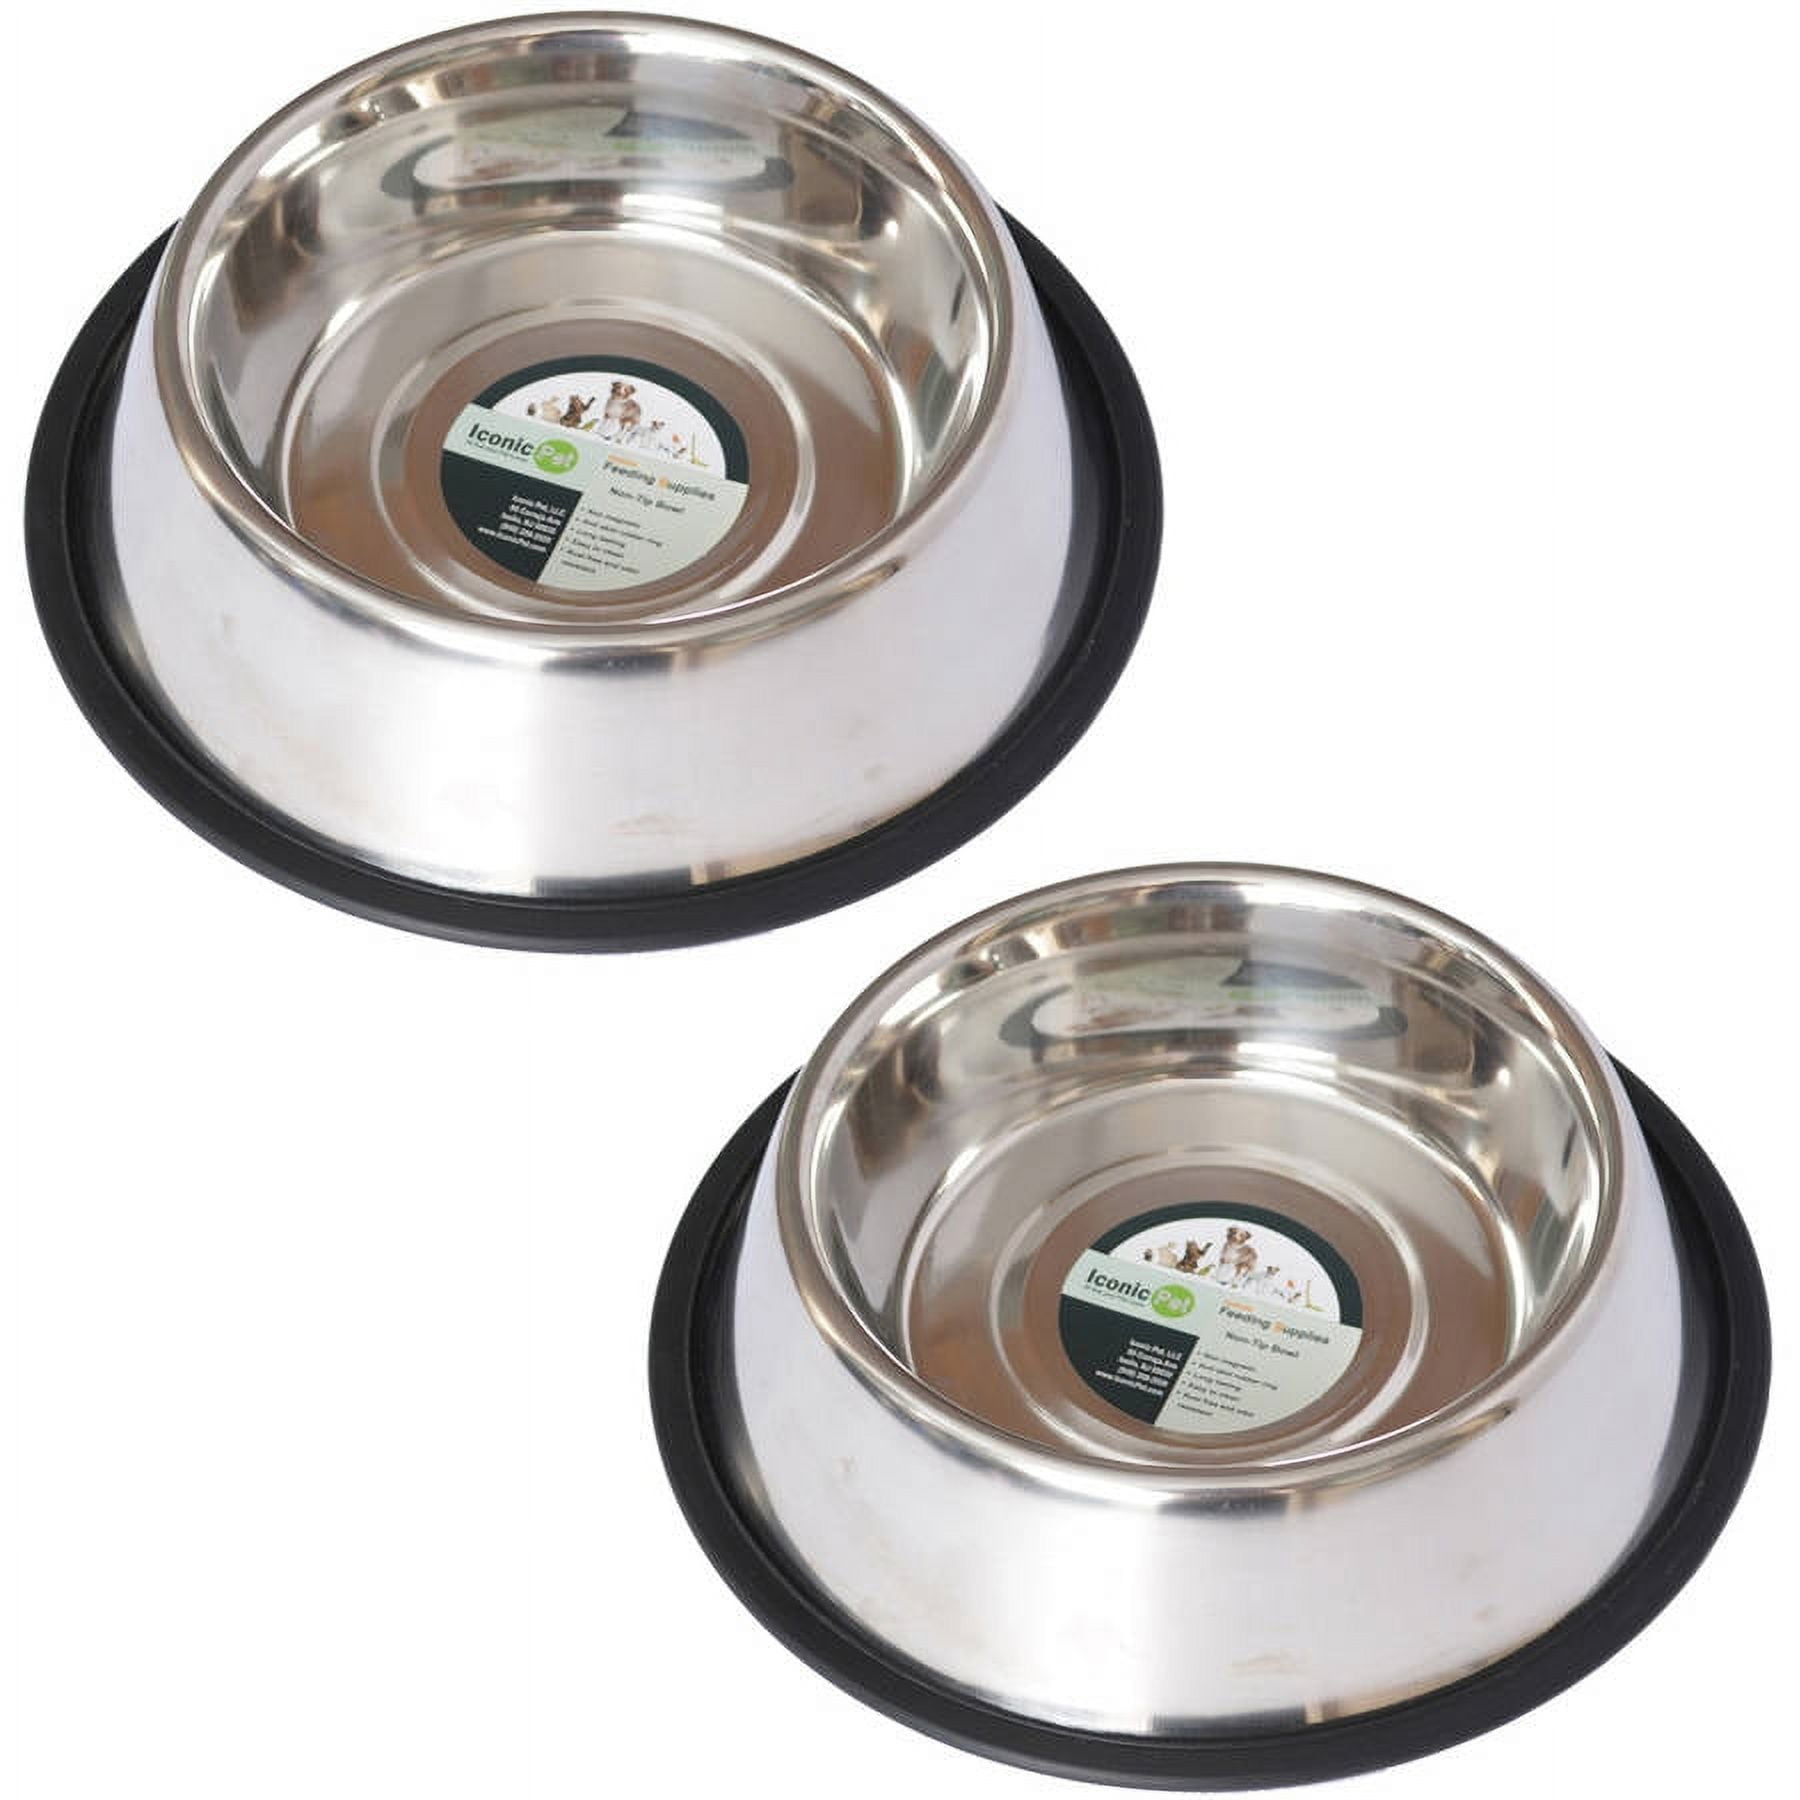 Picture of Iconic Pet 51412 16 oz Stainless Steel Non-Skid Pet Bowl for Dog Or Cat, Pack of 2